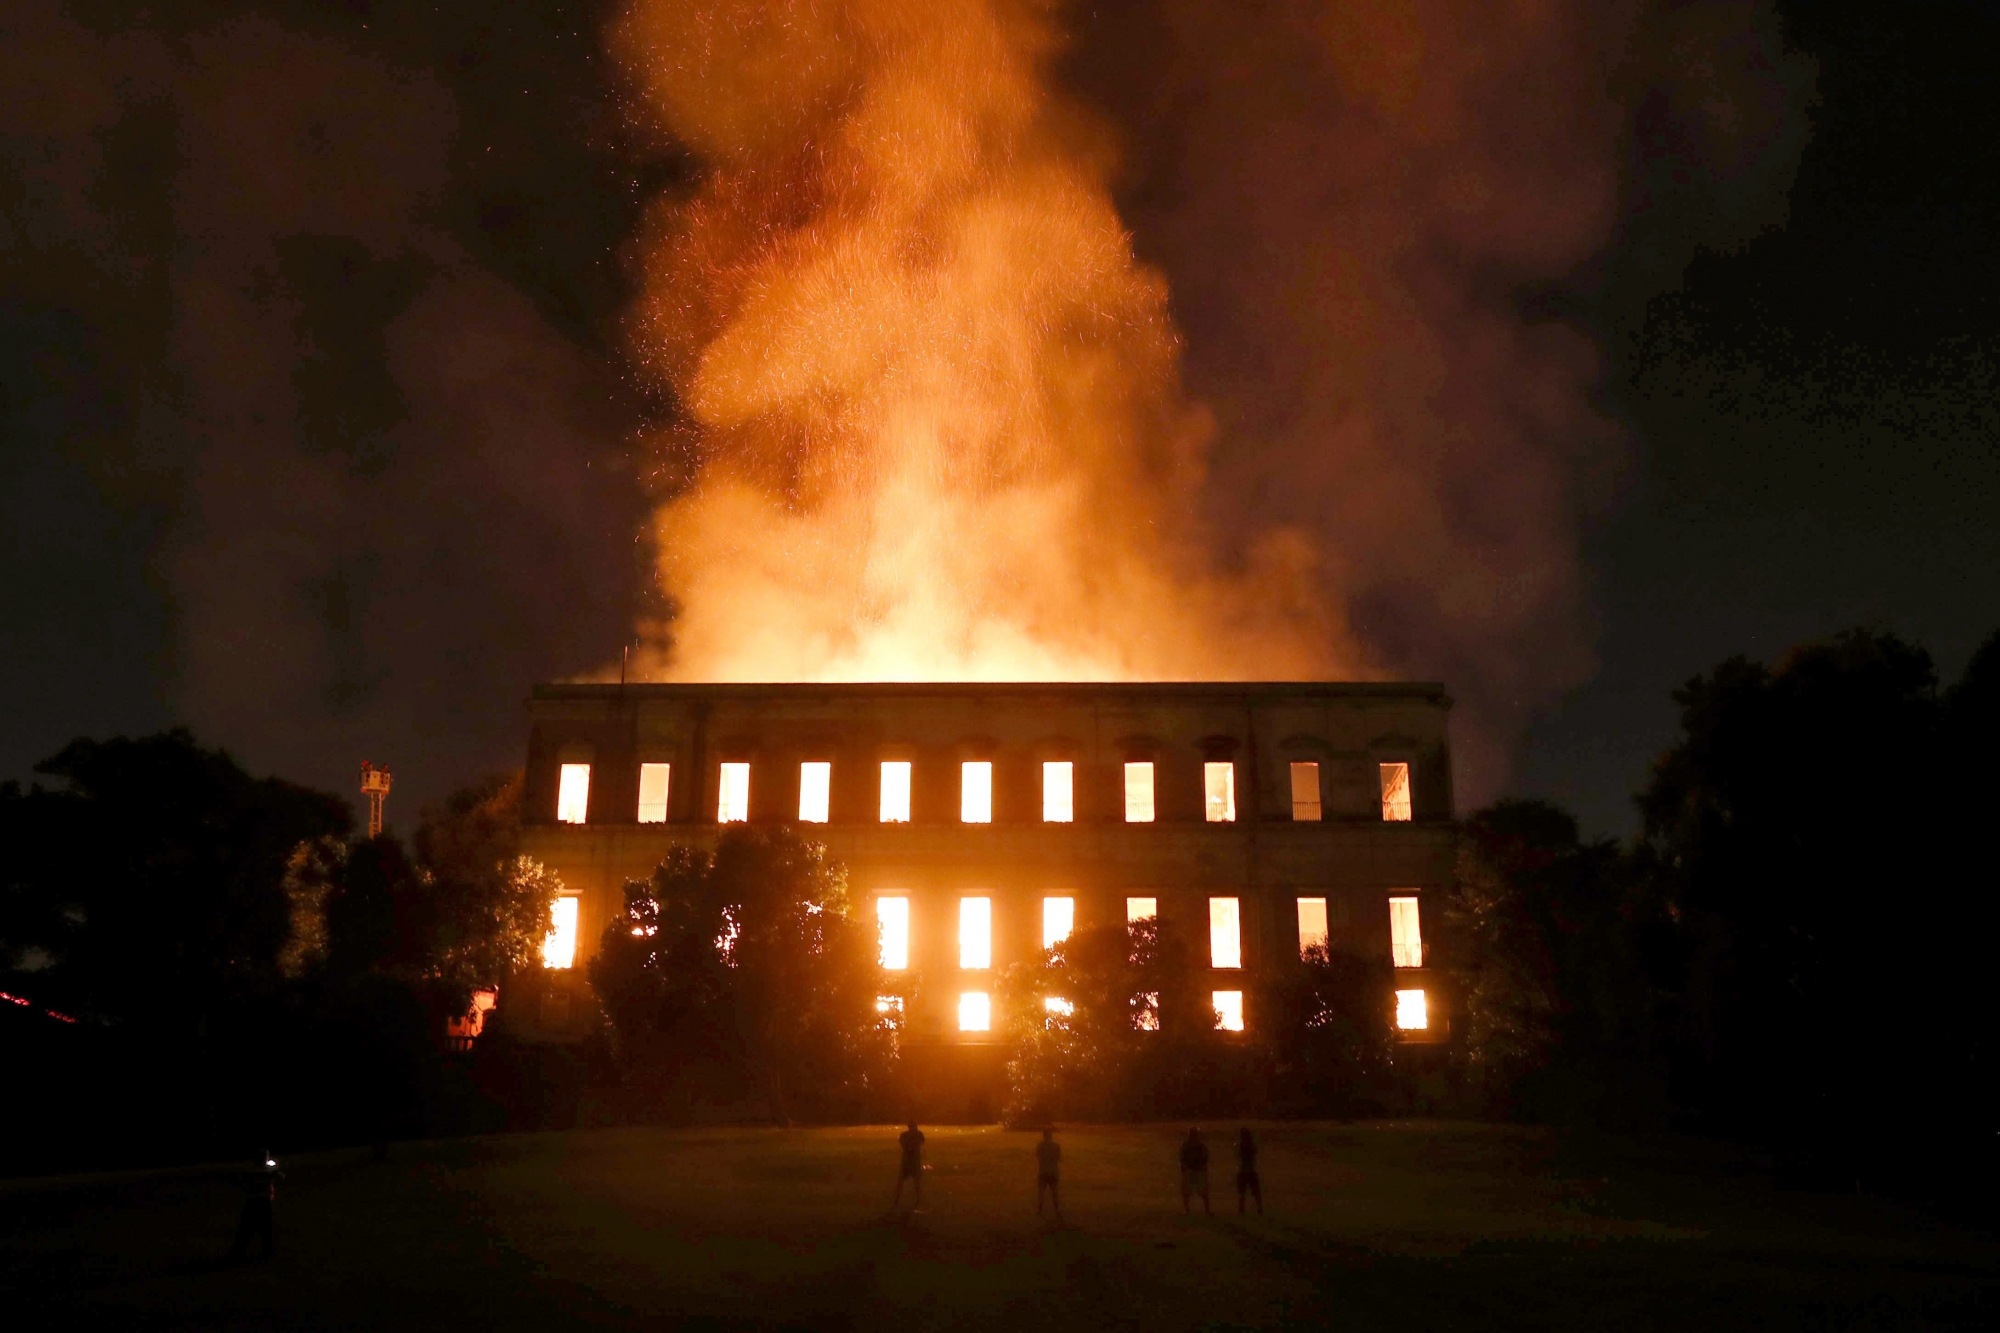 epa06993728 A fire burns inside the National Museum of Rio de Janeiro in Rio de Janeiro, Brazil, 02 September 2018. The museum houses some 20 million pieces that date back to the Brazilian imperial era. Authorities have said the cause of the fire is still unknown. No injuries have been reported.  EPA/MARCELO SAYAO BRAZIL MUSEUMS FIRE